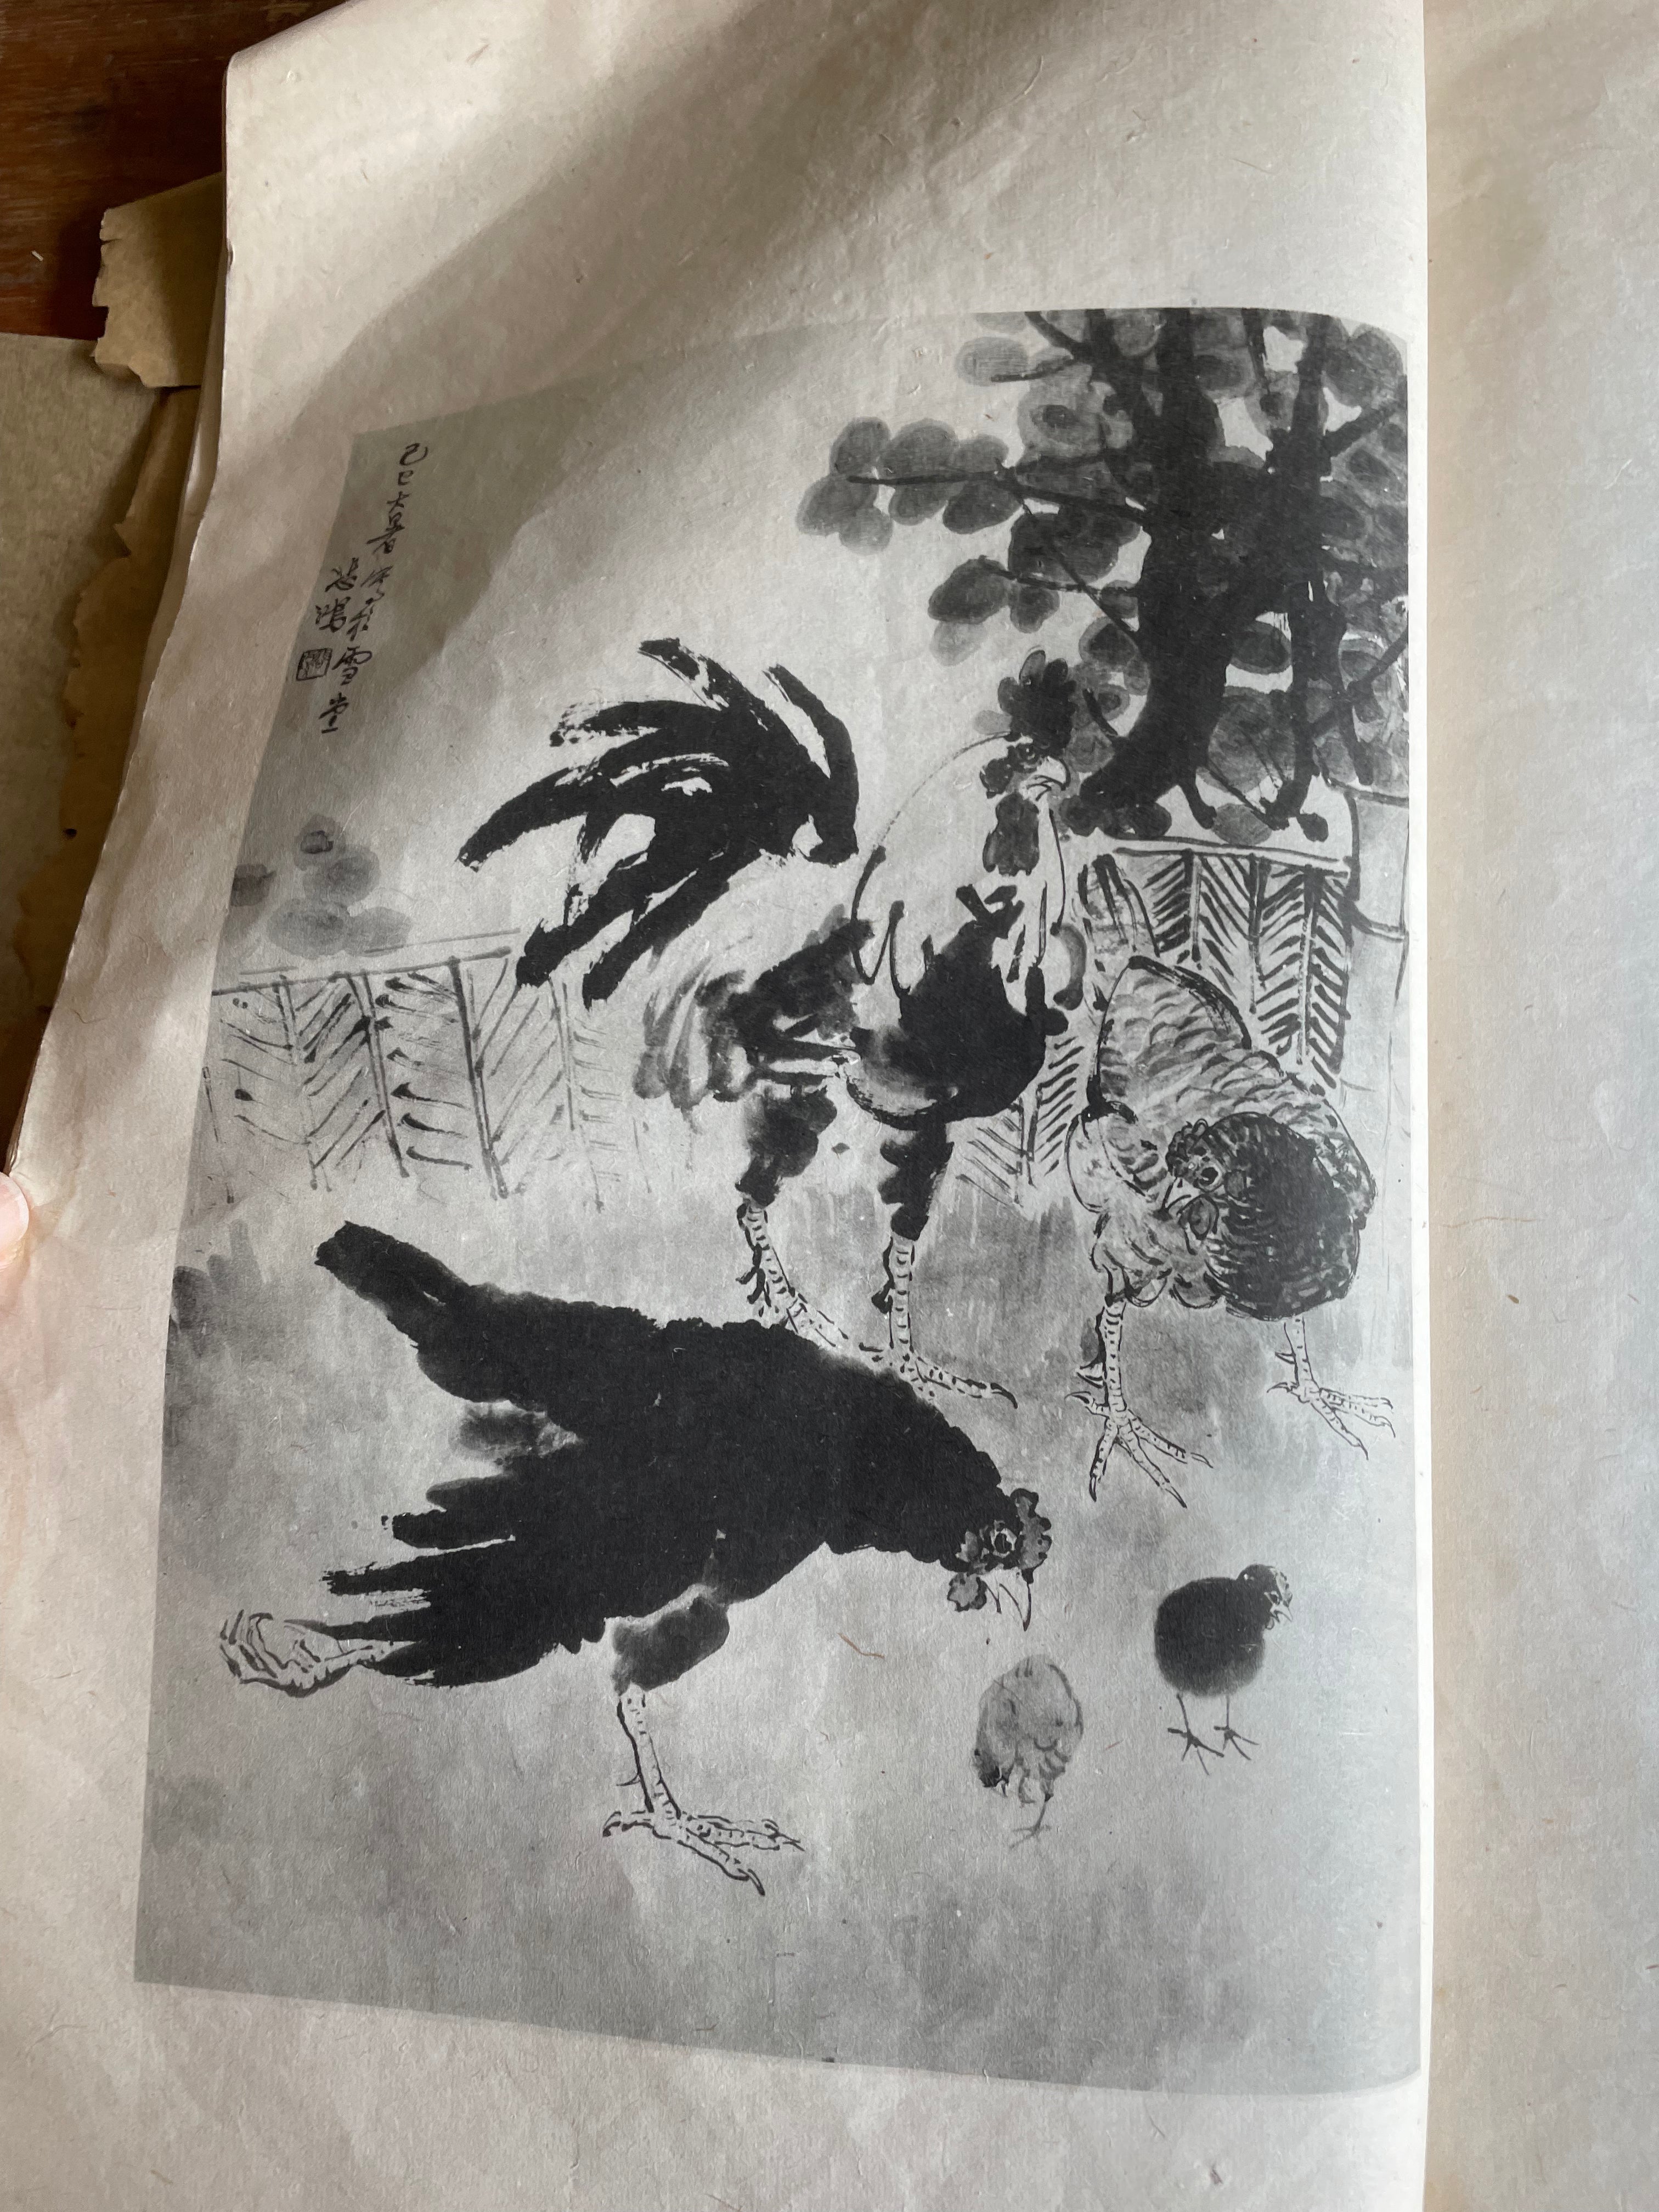 Old Chinese Book with 20 Ink Prints